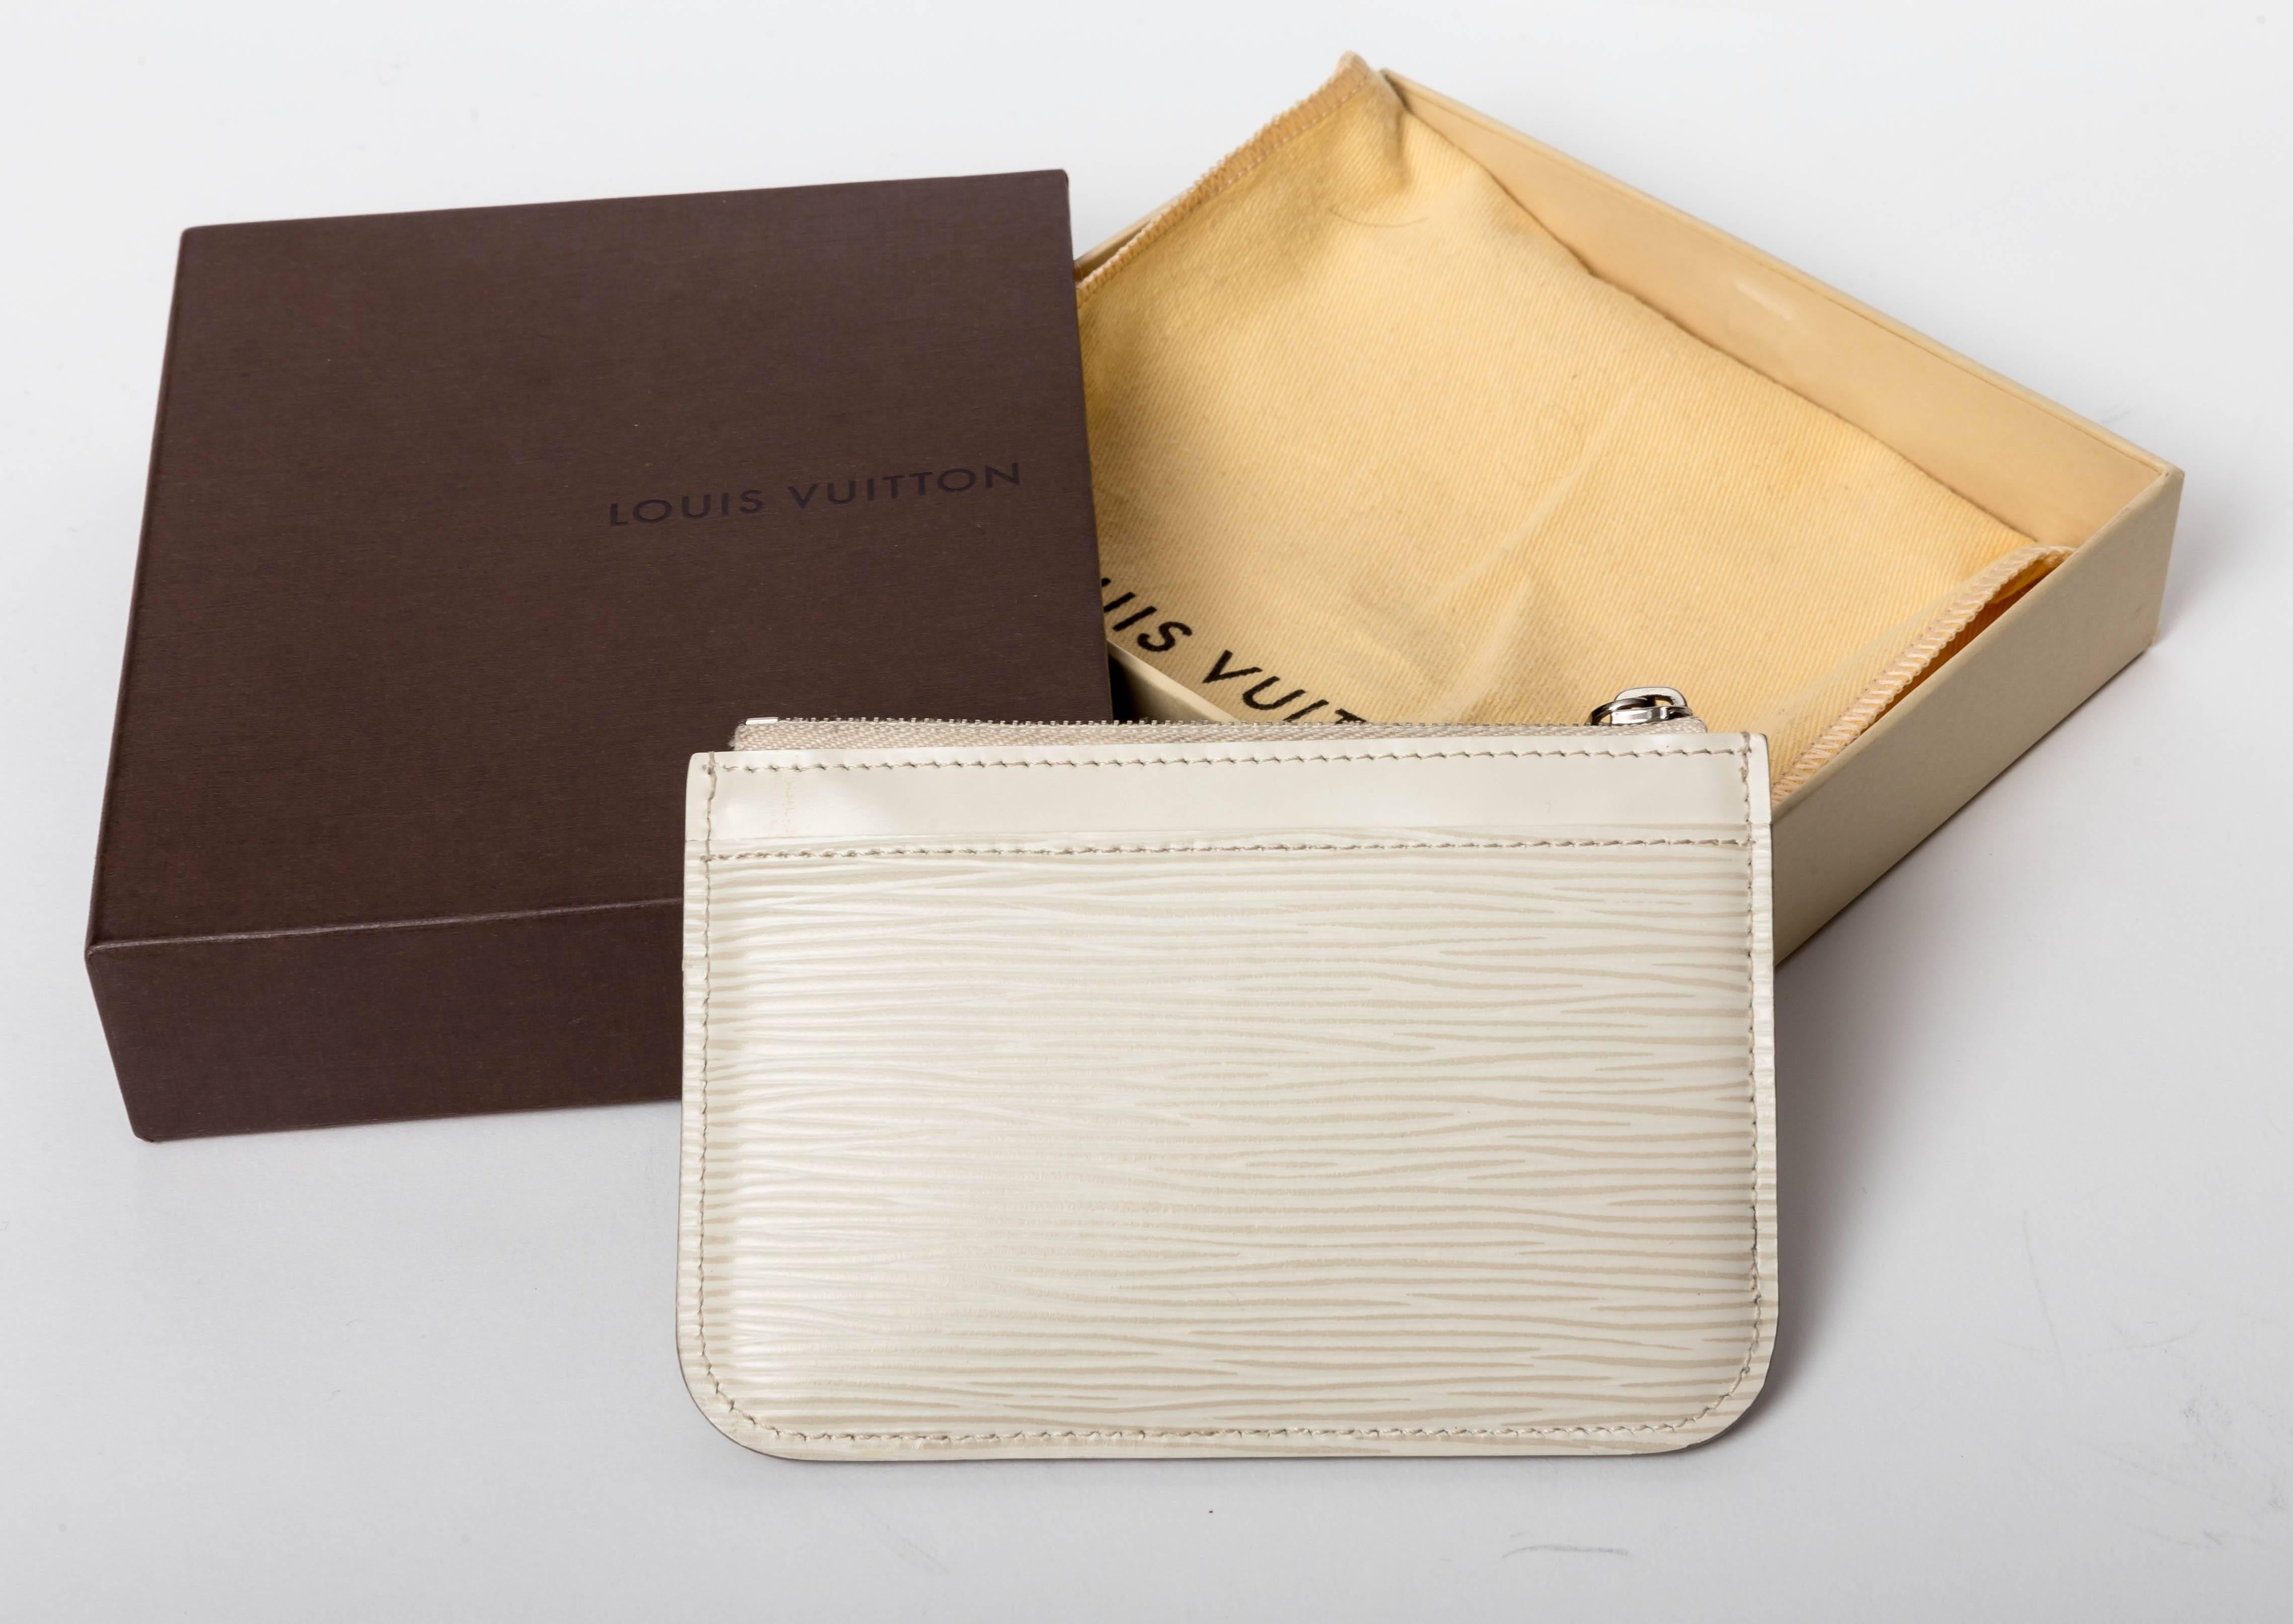 This is a new  Louis Vuitton White Epi Key Pouch. The Louis Vuitton box is included. Crafted of Louis Vuitton's signature textured epi leather, this pouch features silver hardware. The top unzips to a leather interior. This piece is both practical